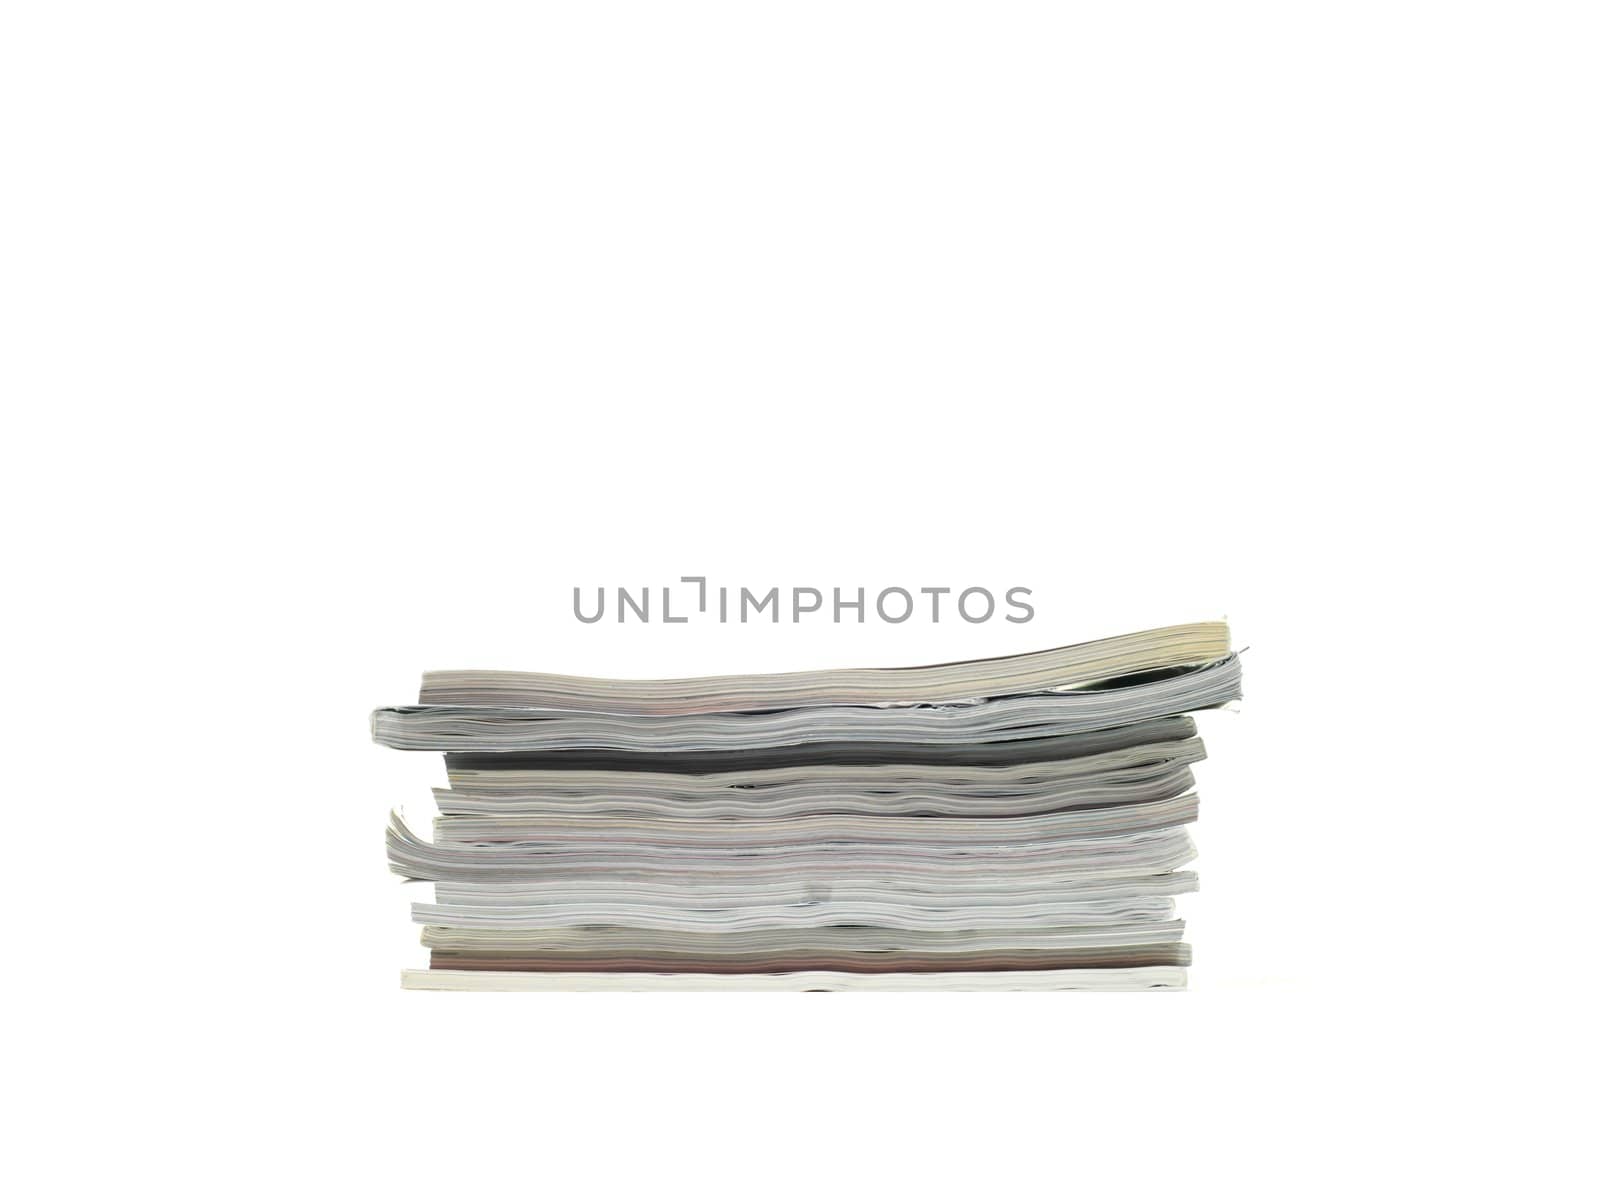 A stack of magazines isolated against a white background